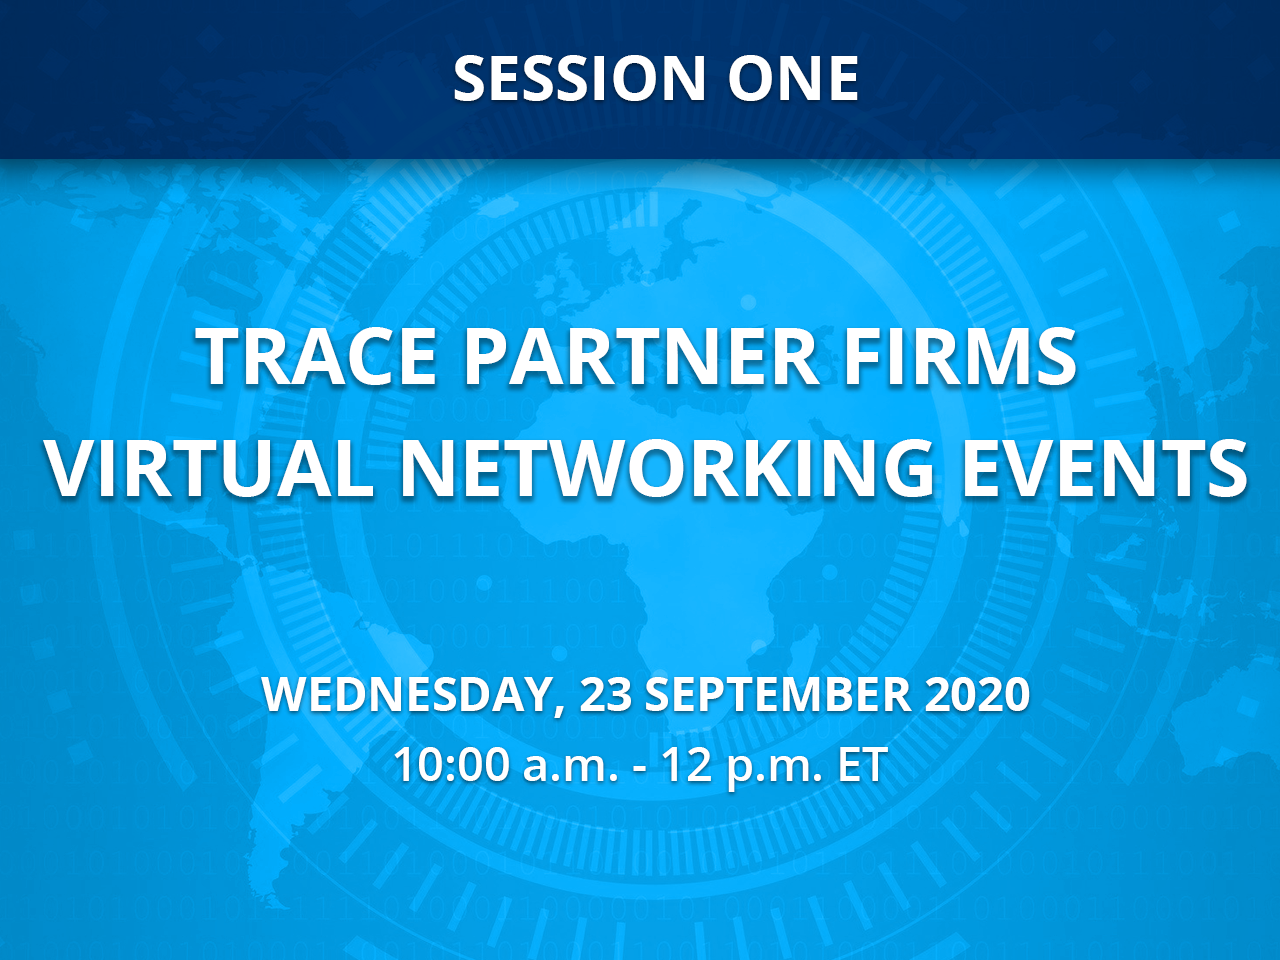 TRACE Partner Firms Virtual Networking Event: Session One